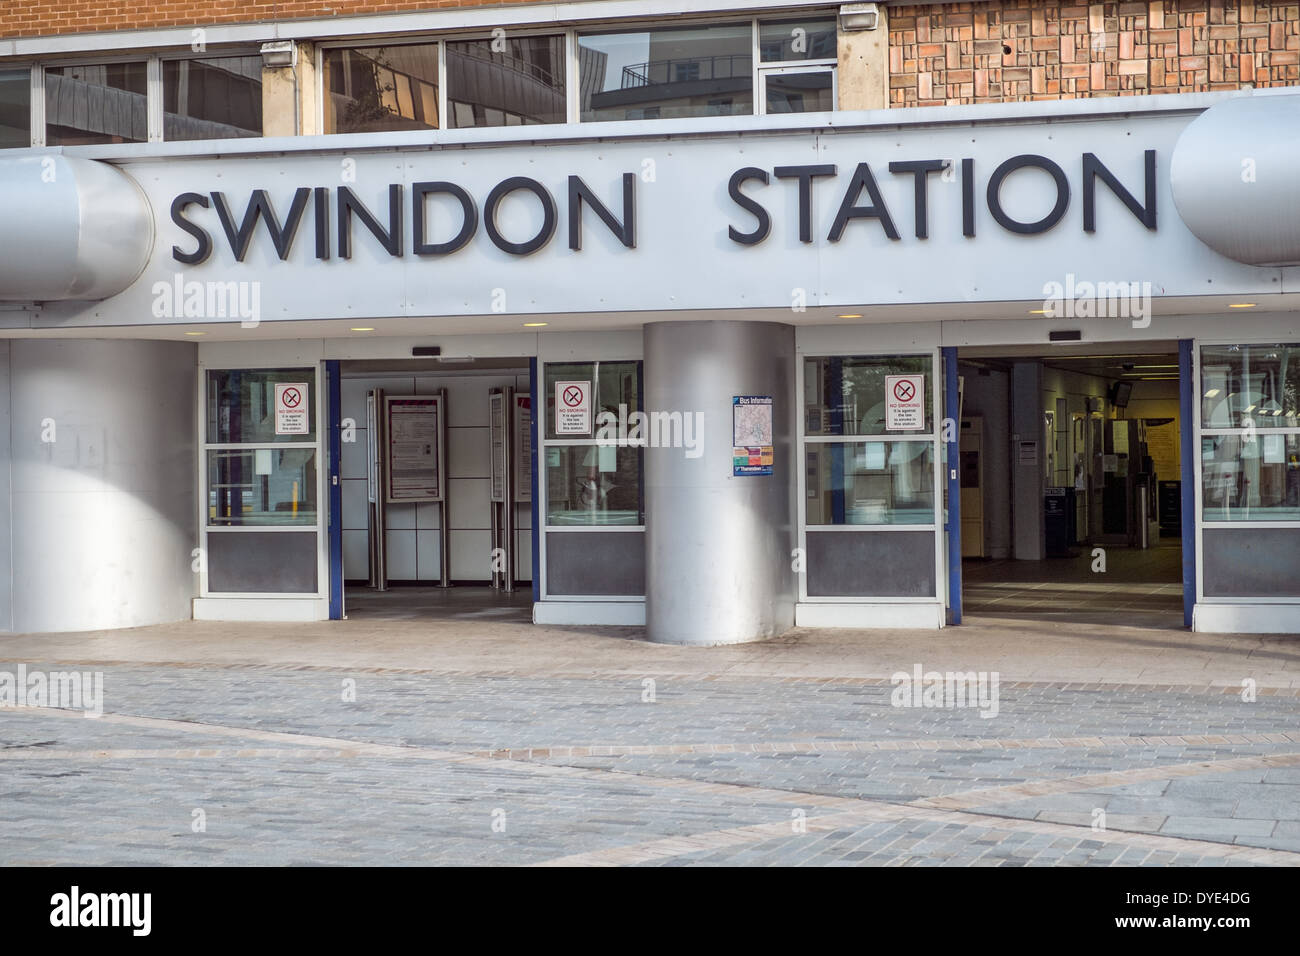 The sign & entrance to the railway station at Swindon, Wiltshire, UK Stock Photo